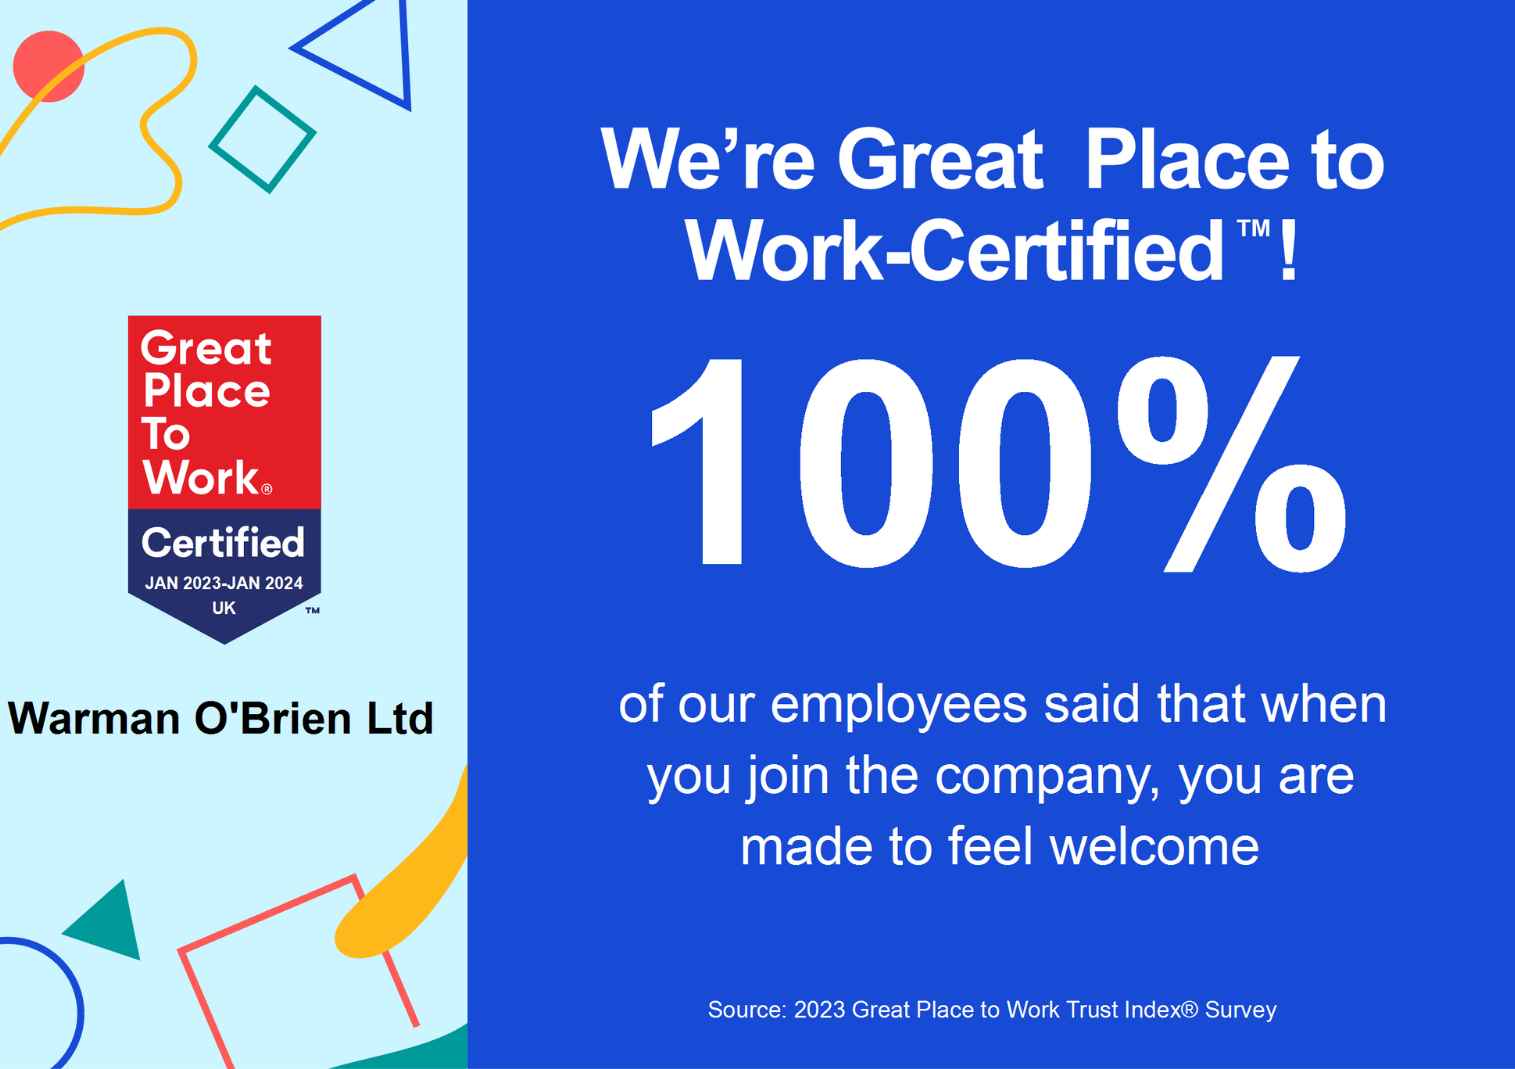 Creating an Amazing Employee Experience: Warman O'Brien Achieves Great Place to Work®️ Certification™️